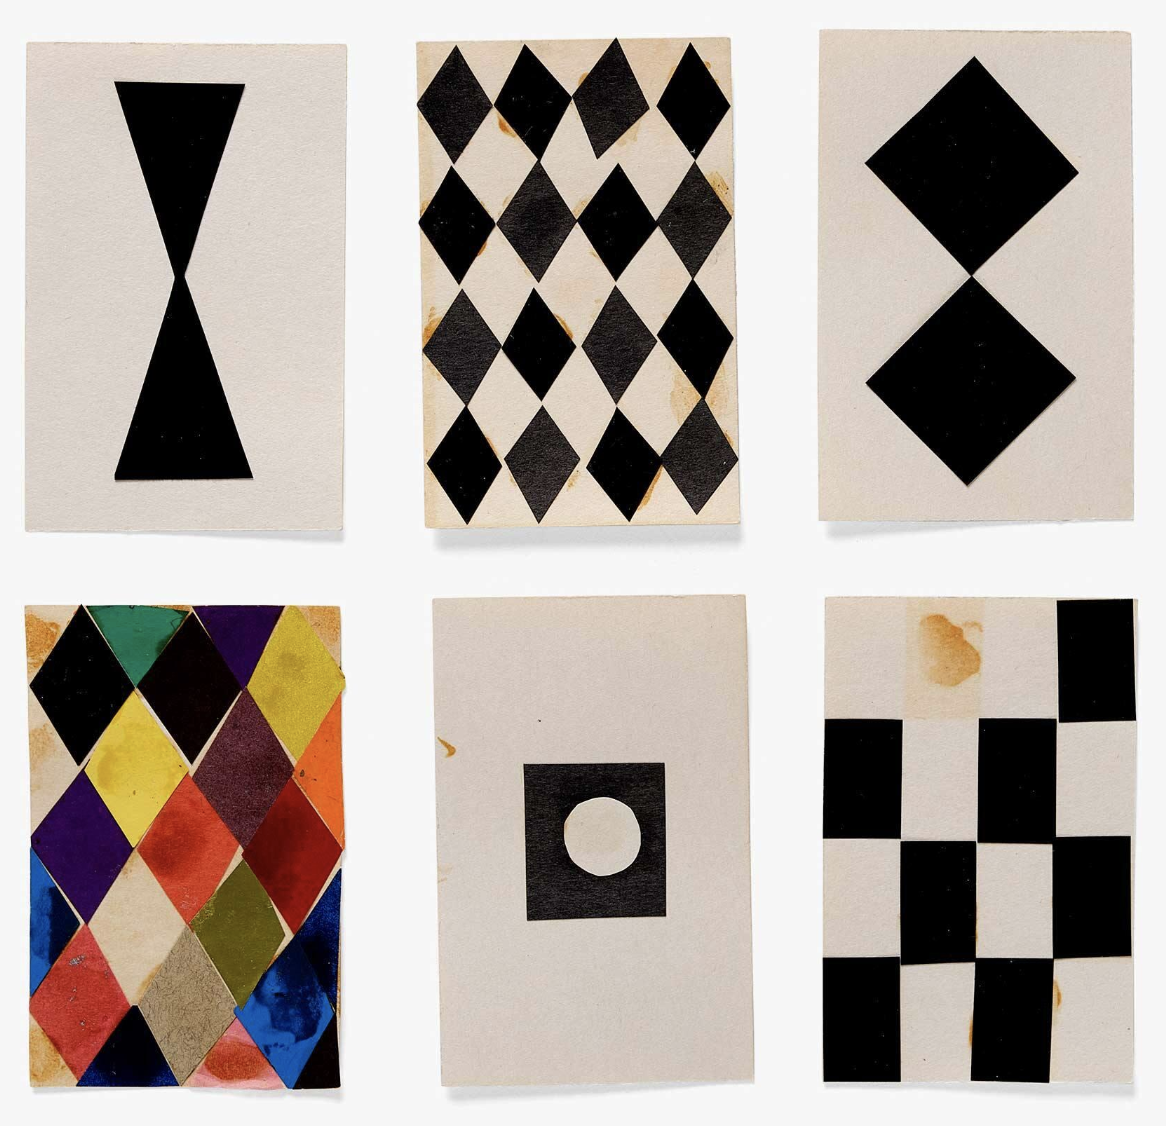 Ray Eames prototype for House of Cards